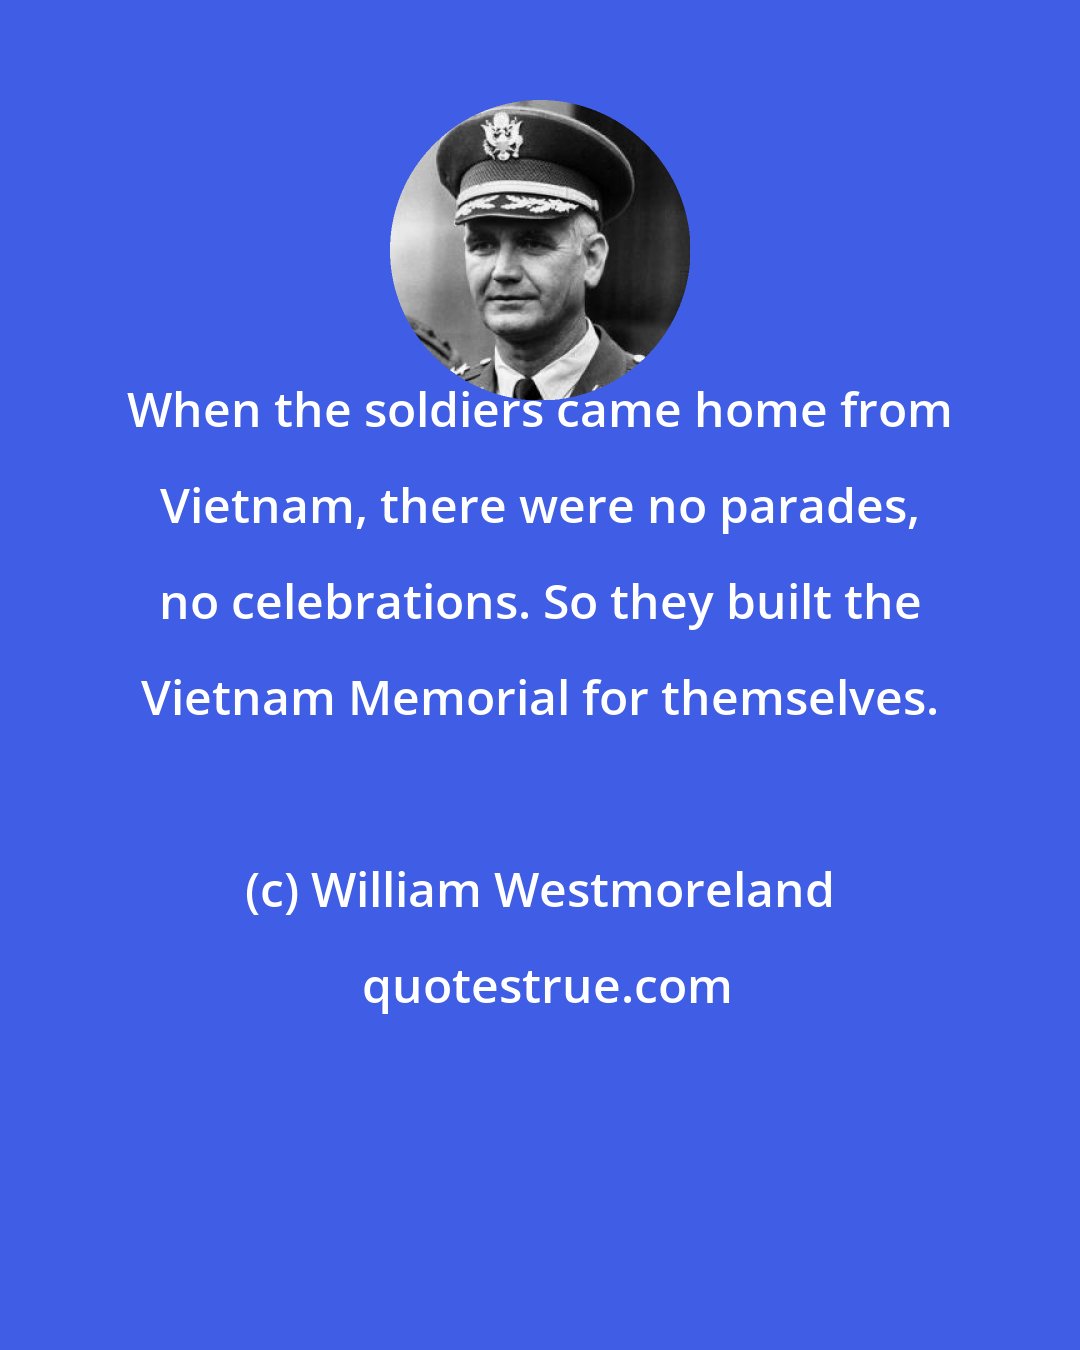 William Westmoreland: When the soldiers came home from Vietnam, there were no parades, no celebrations. So they built the Vietnam Memorial for themselves.